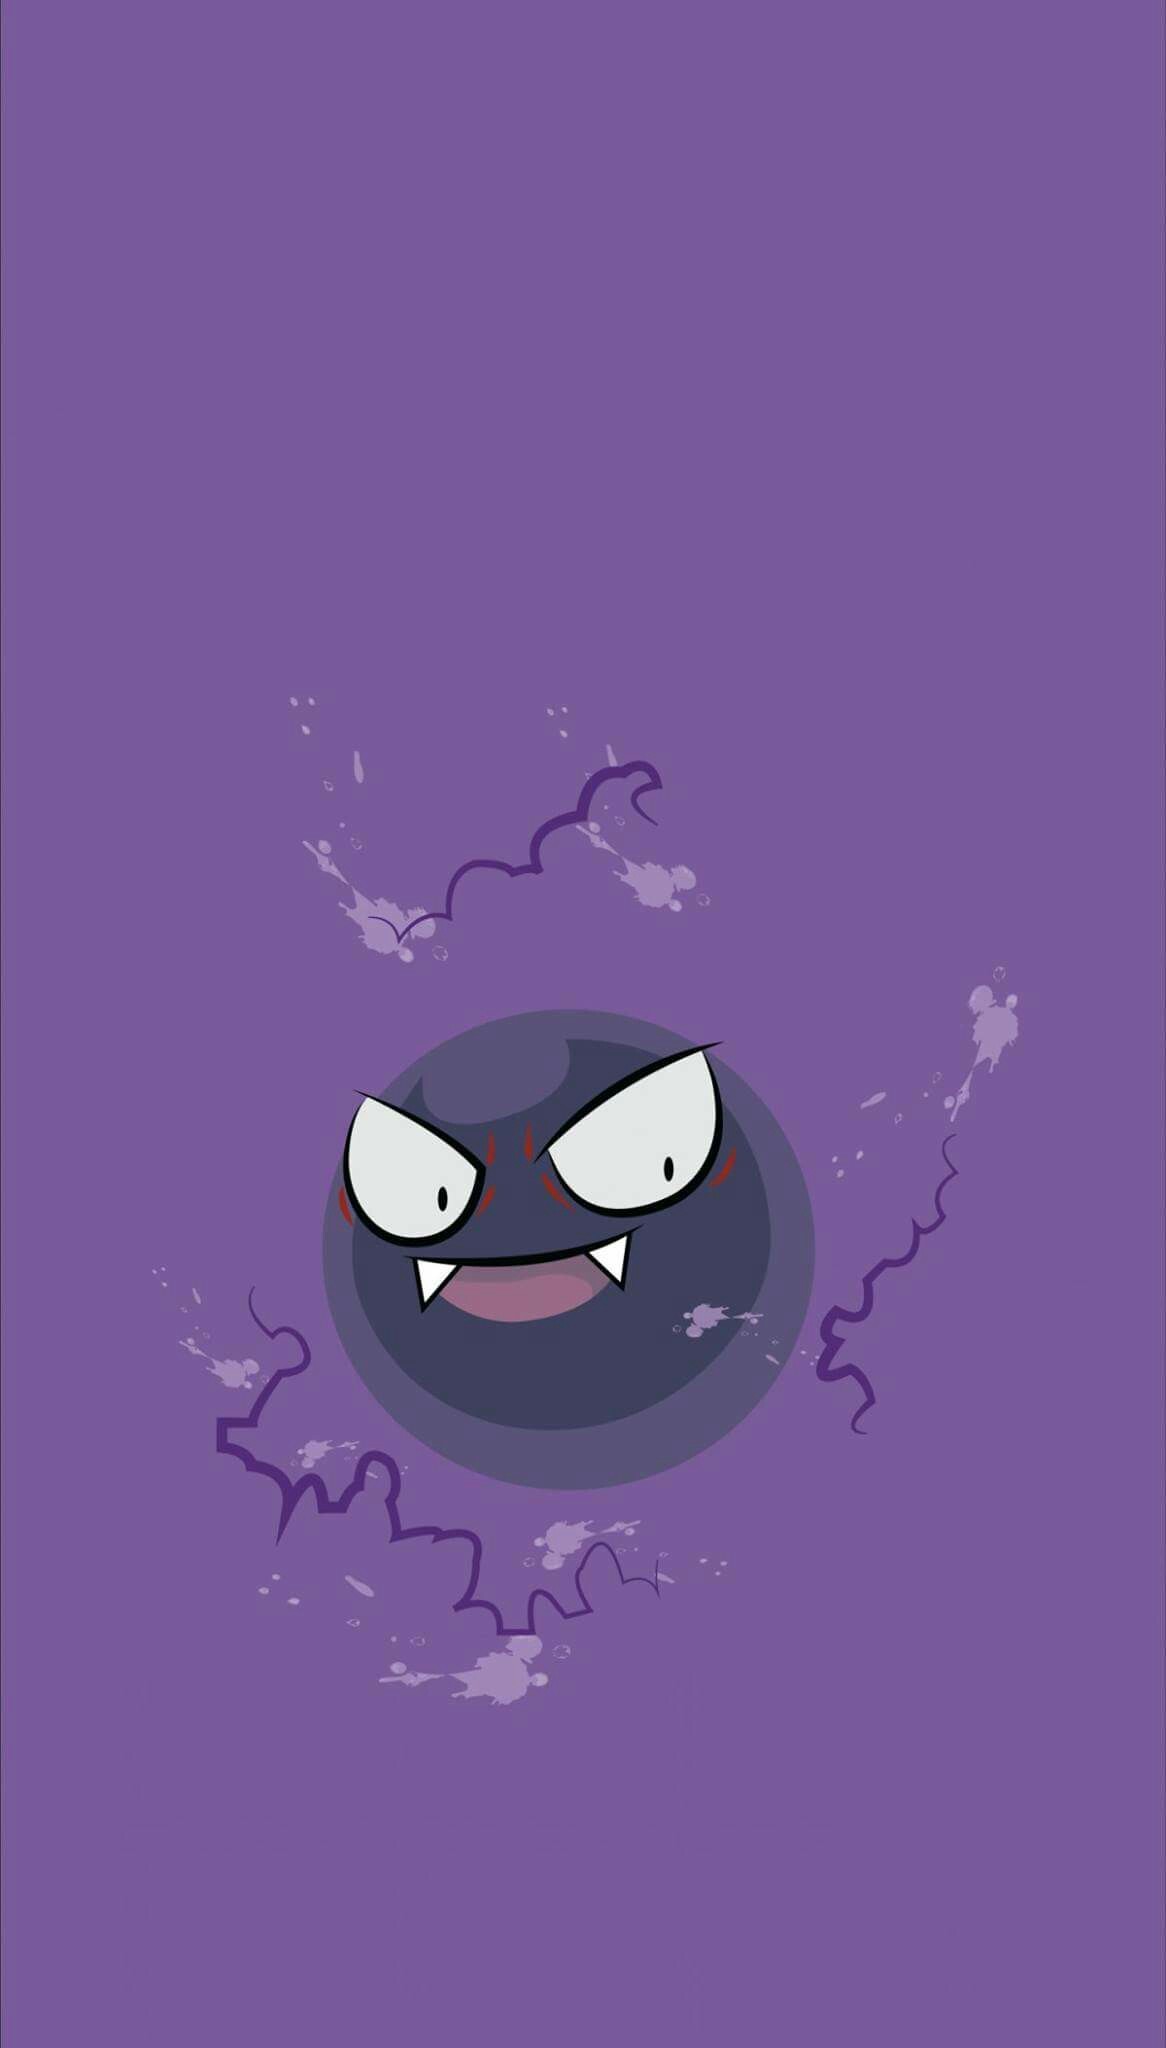 Gastly – Tap to see more Pokemon Go iPhone wallpaper